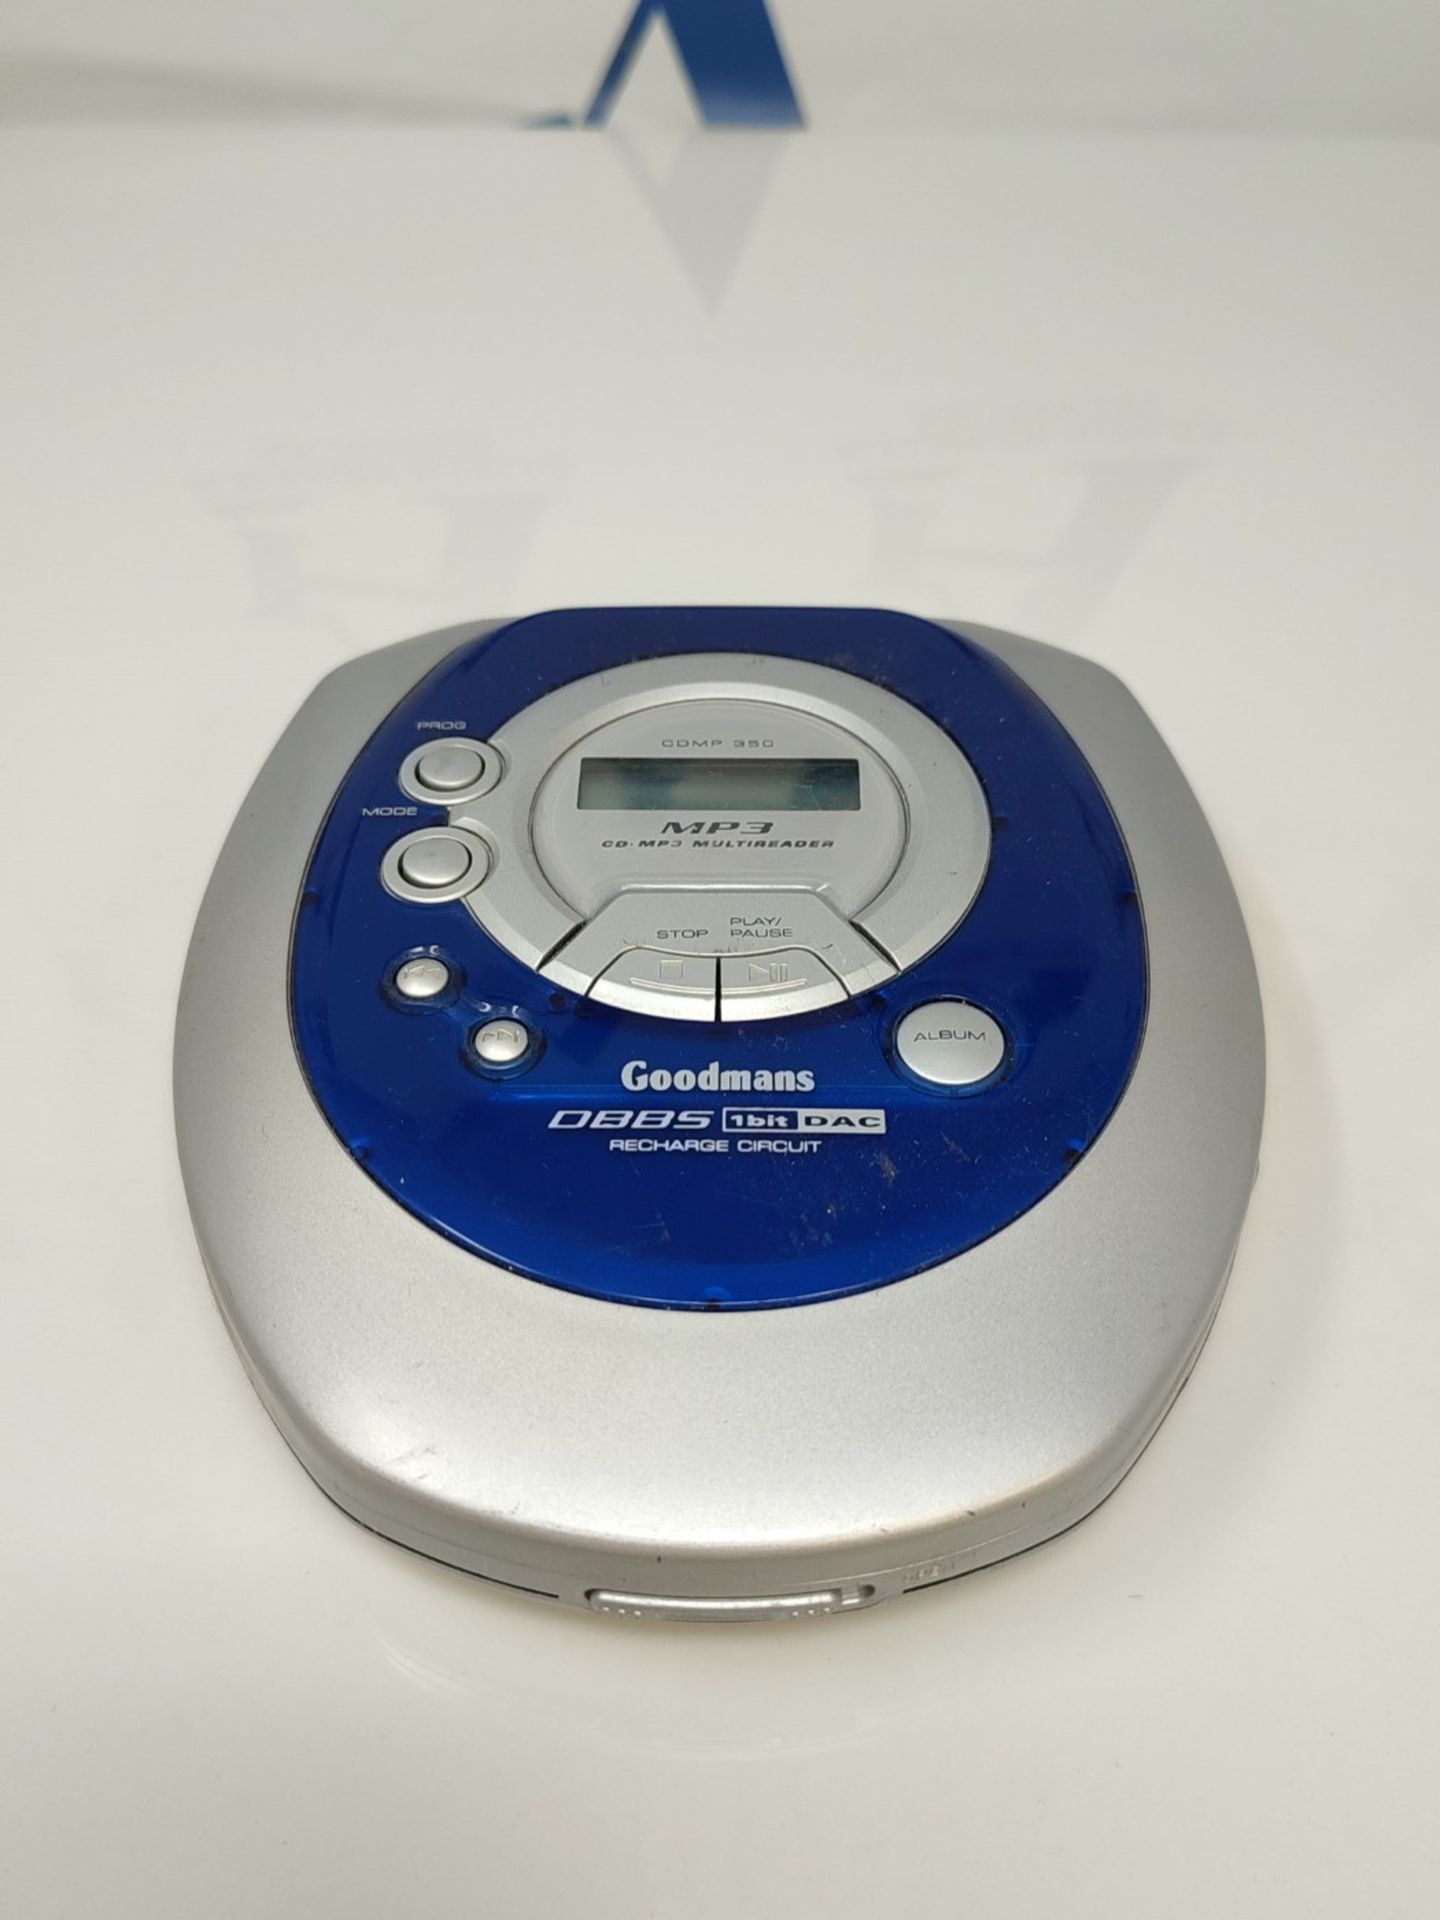 Goodmans CDMP350 Personal Compact Disc Player with build in Mp3 Reader